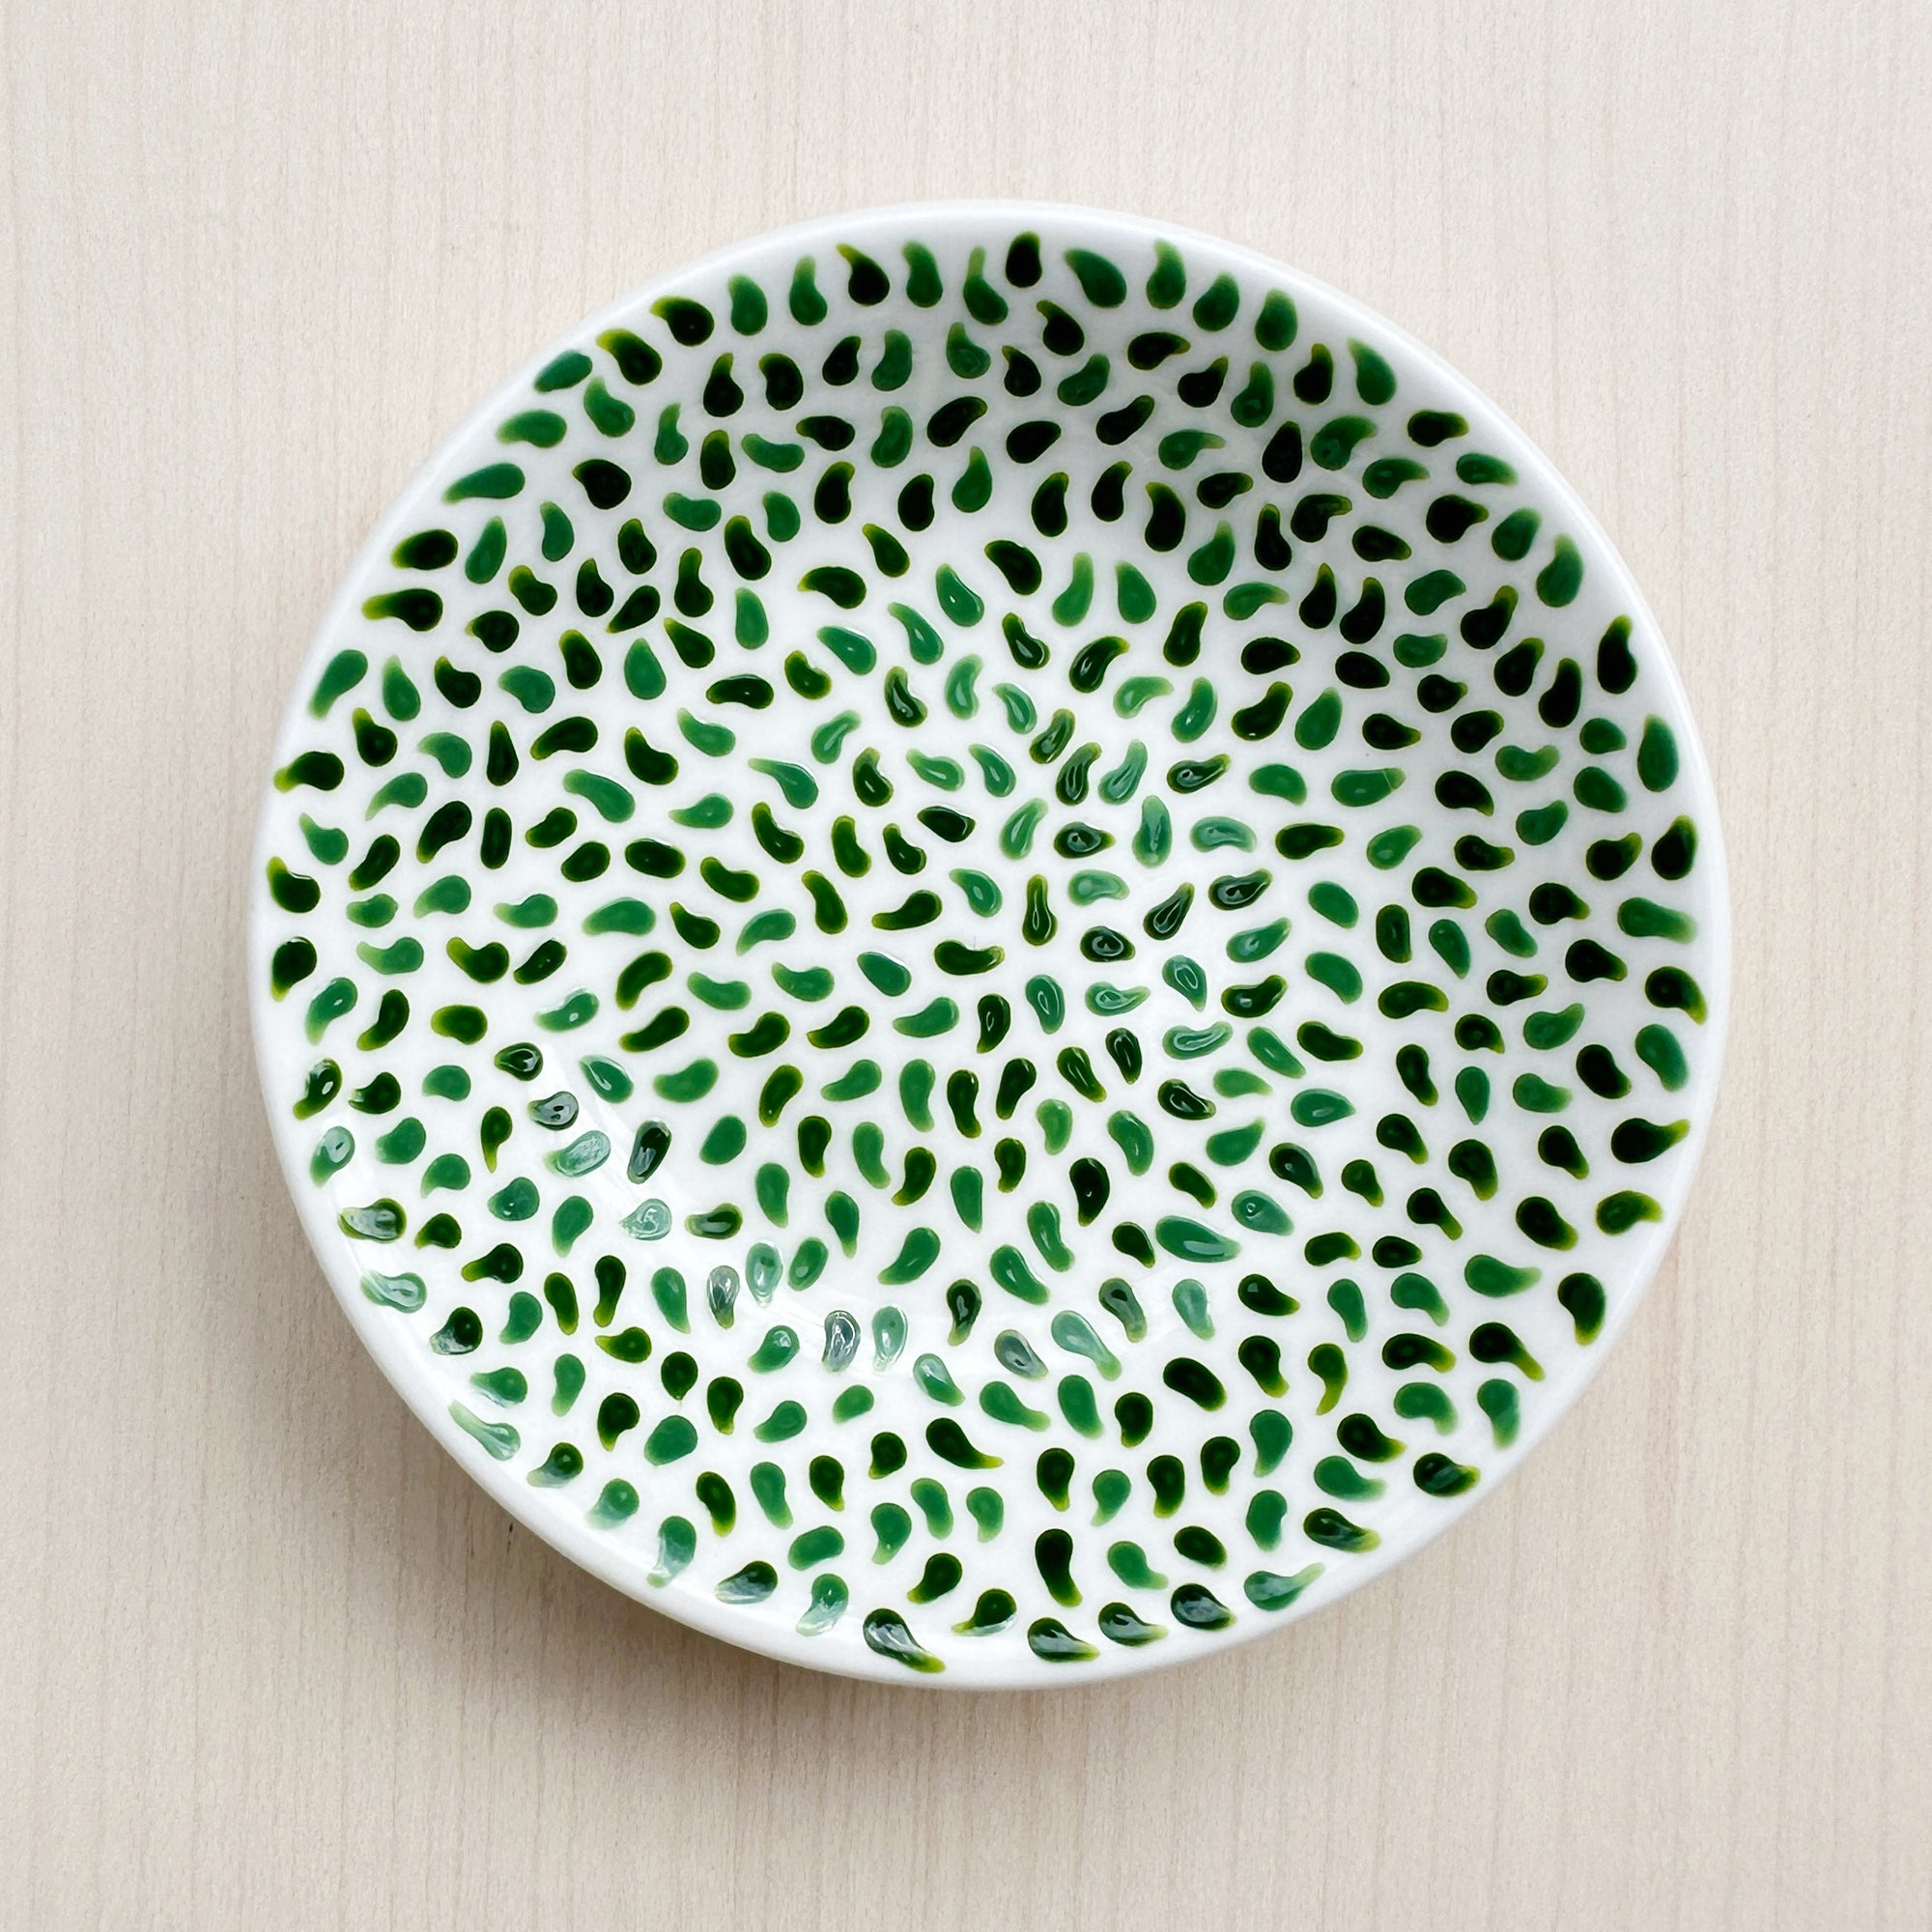 Mixed Green Leaves - Hand Painted Porcelain Round Bowl